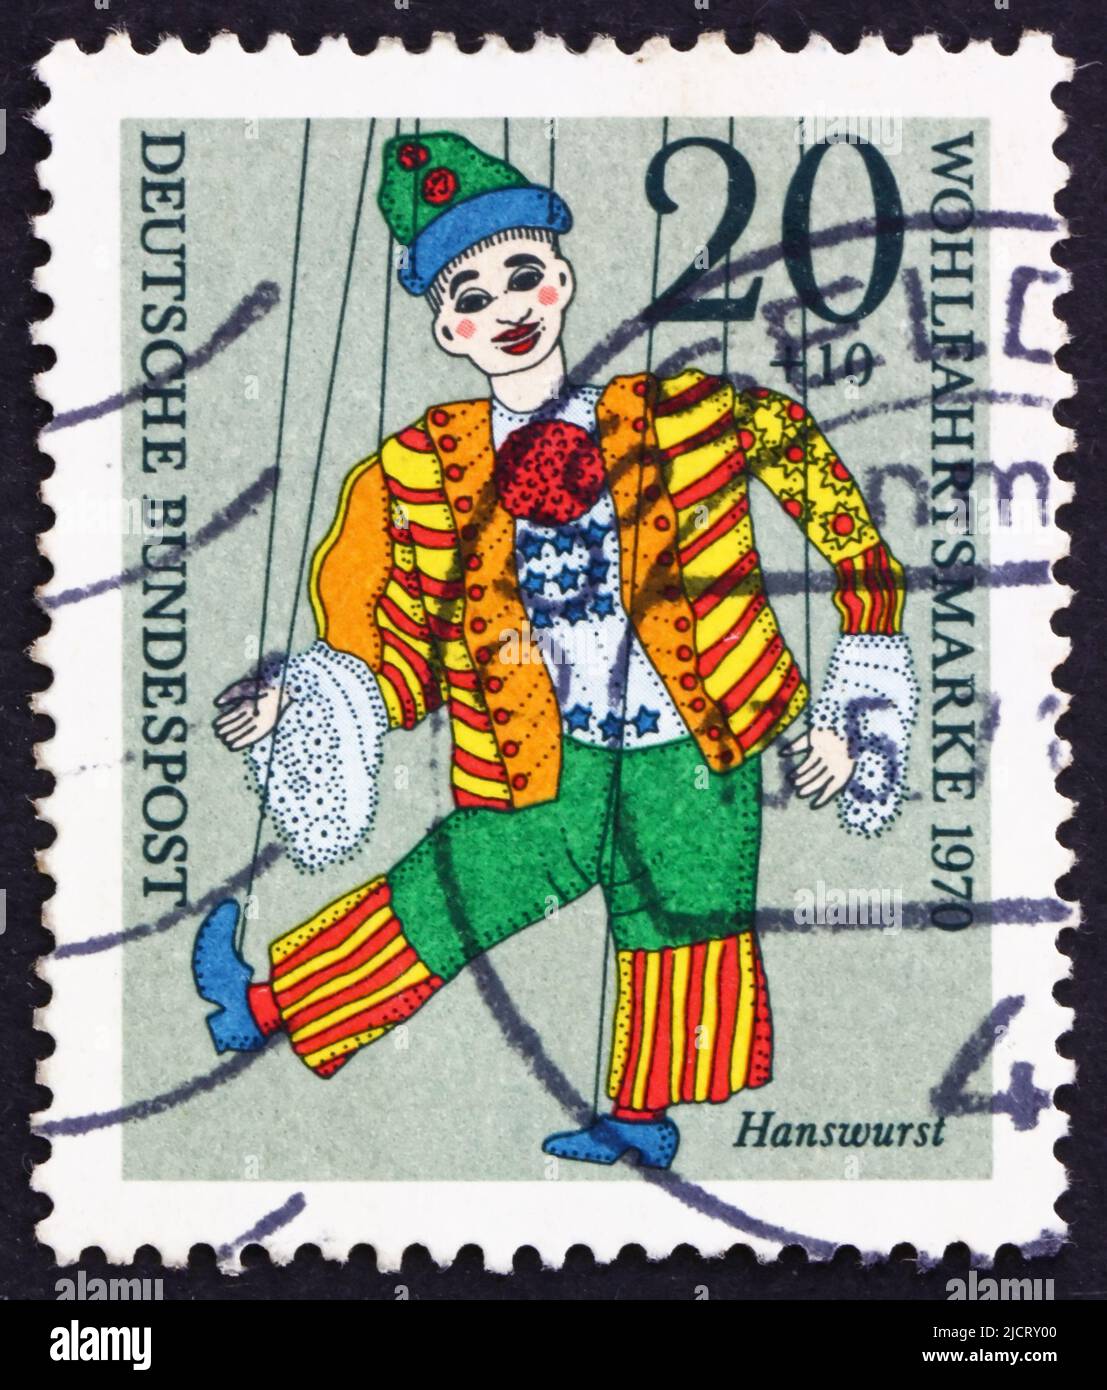 GERMANY - CIRCA 1970: a stamp printed in the Germany shows Hanswurst, Puppet, Nuremberg, circa 1970 Stock Photo